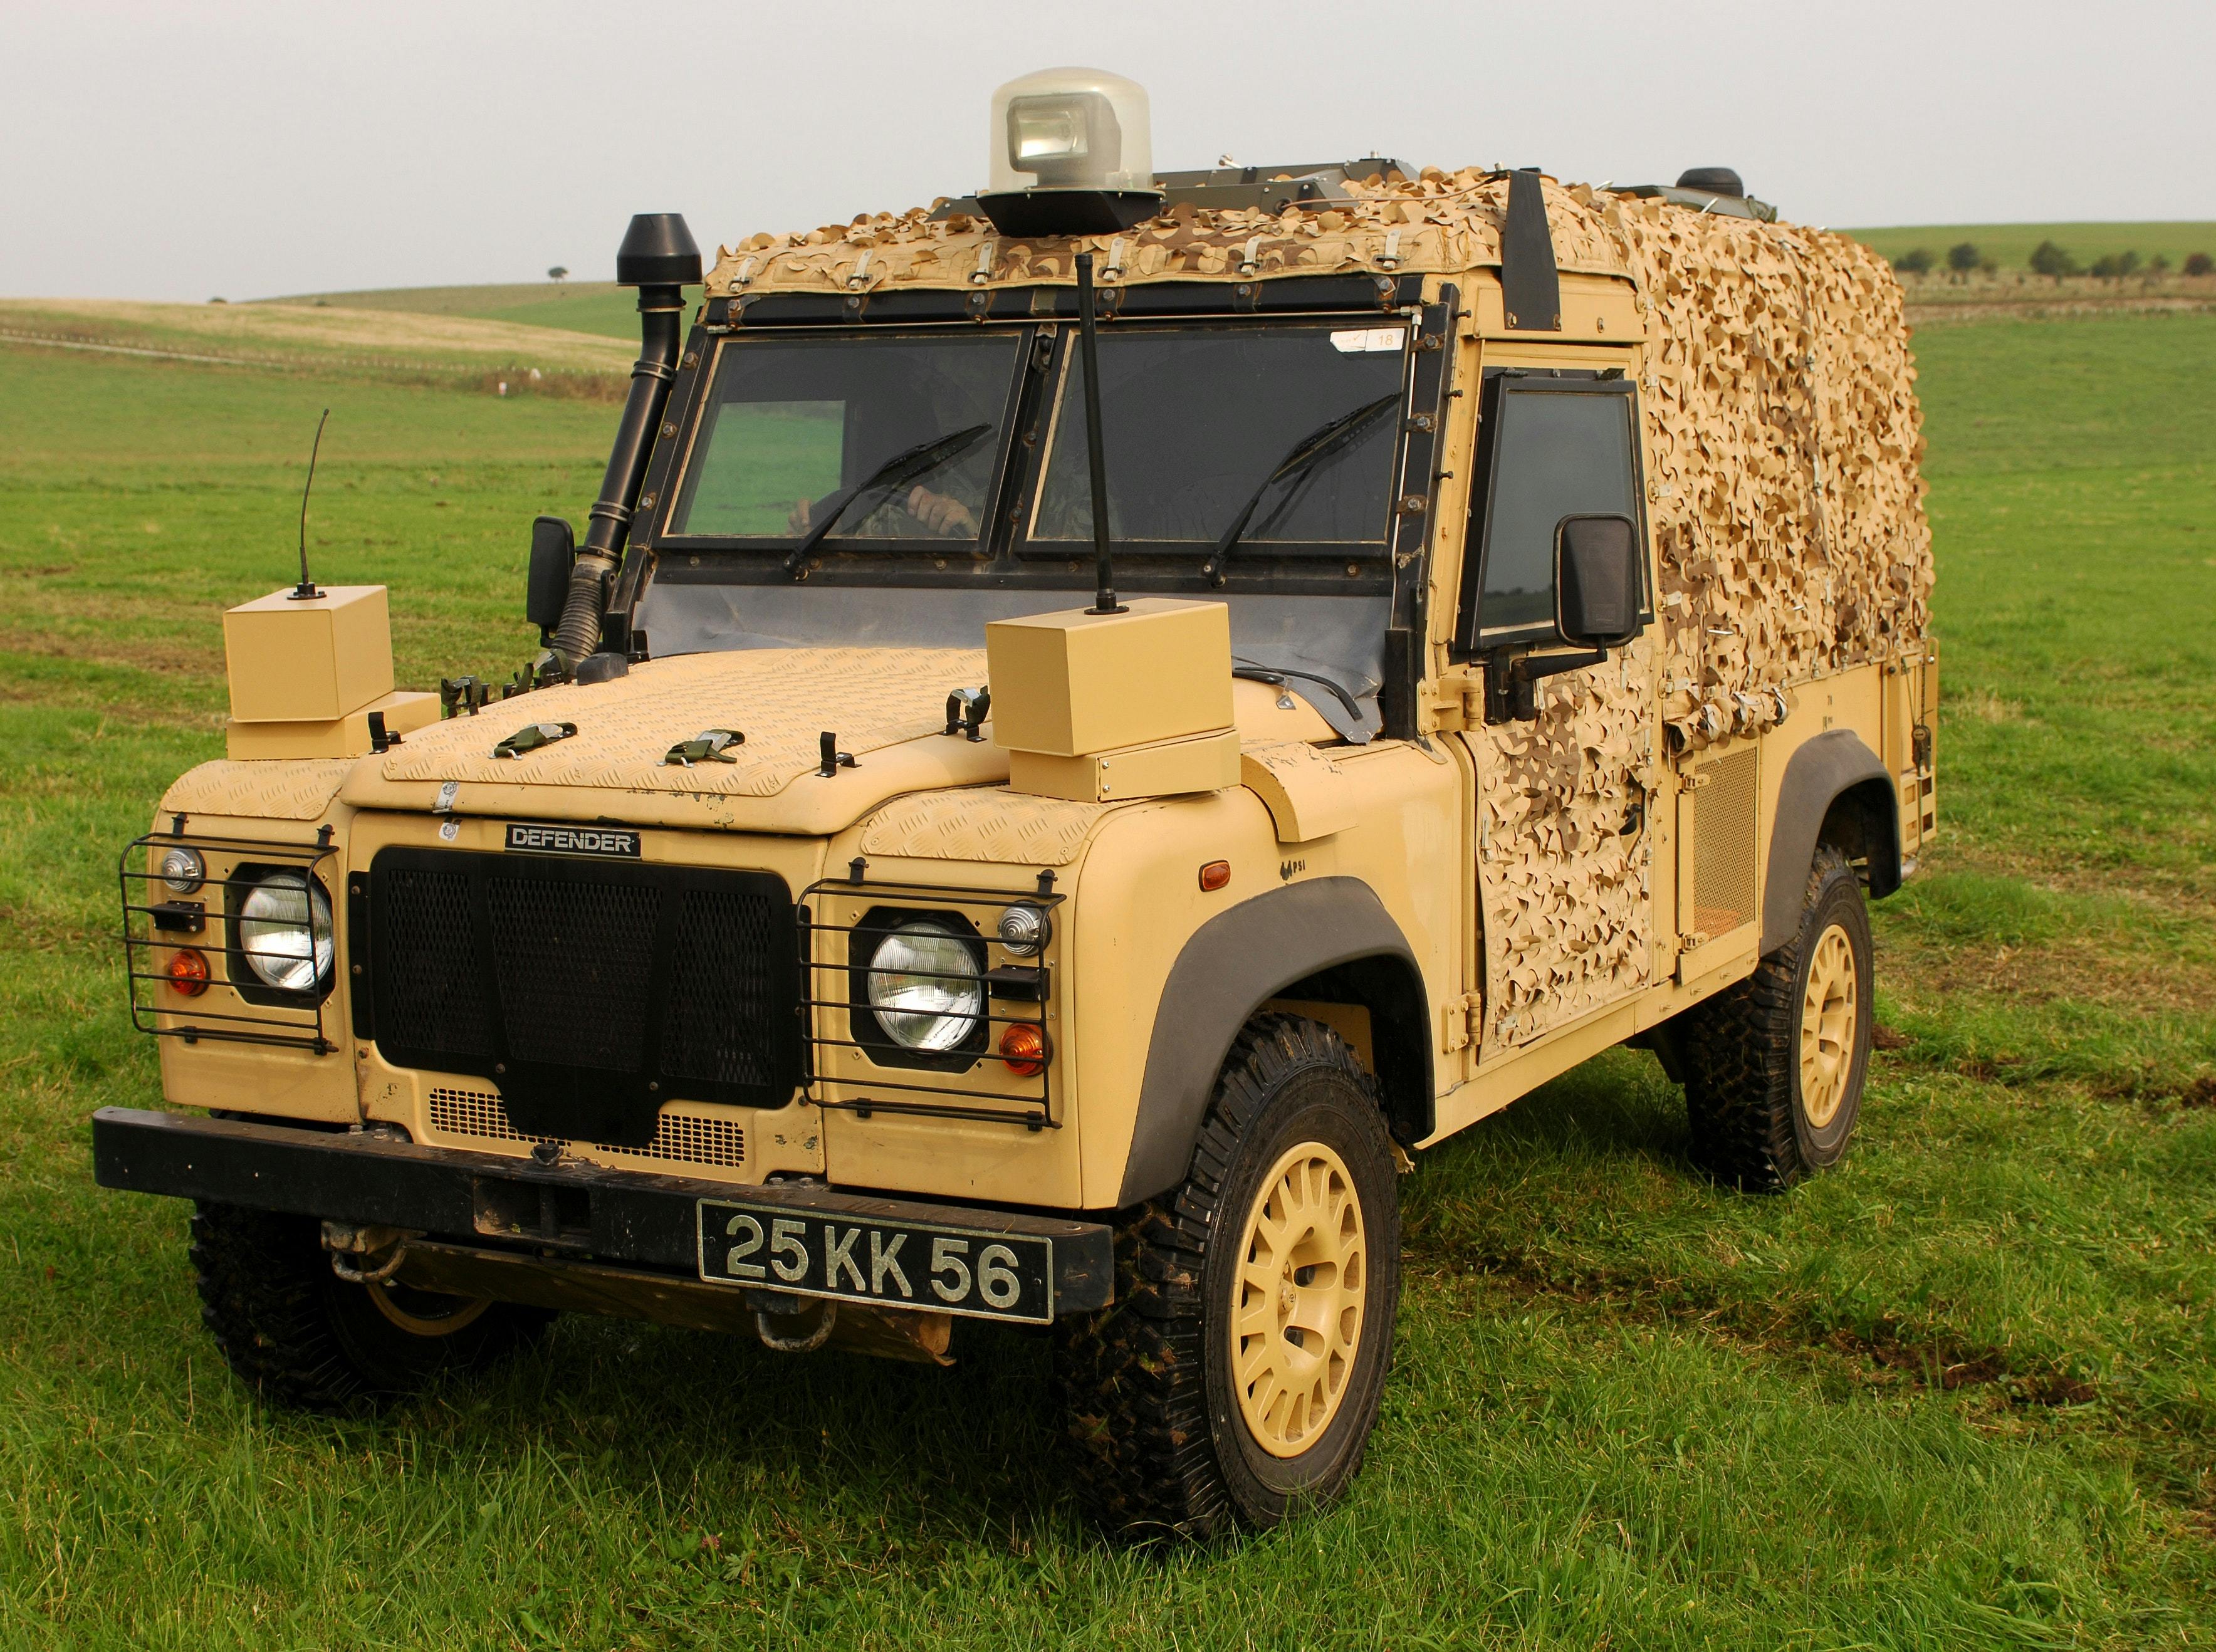 The Land Rover Snatch-Vixen vehicle on show at the Urgent Operational Requirement (UOR) Equipment Demonstration in Salisbury, Wiltshire.